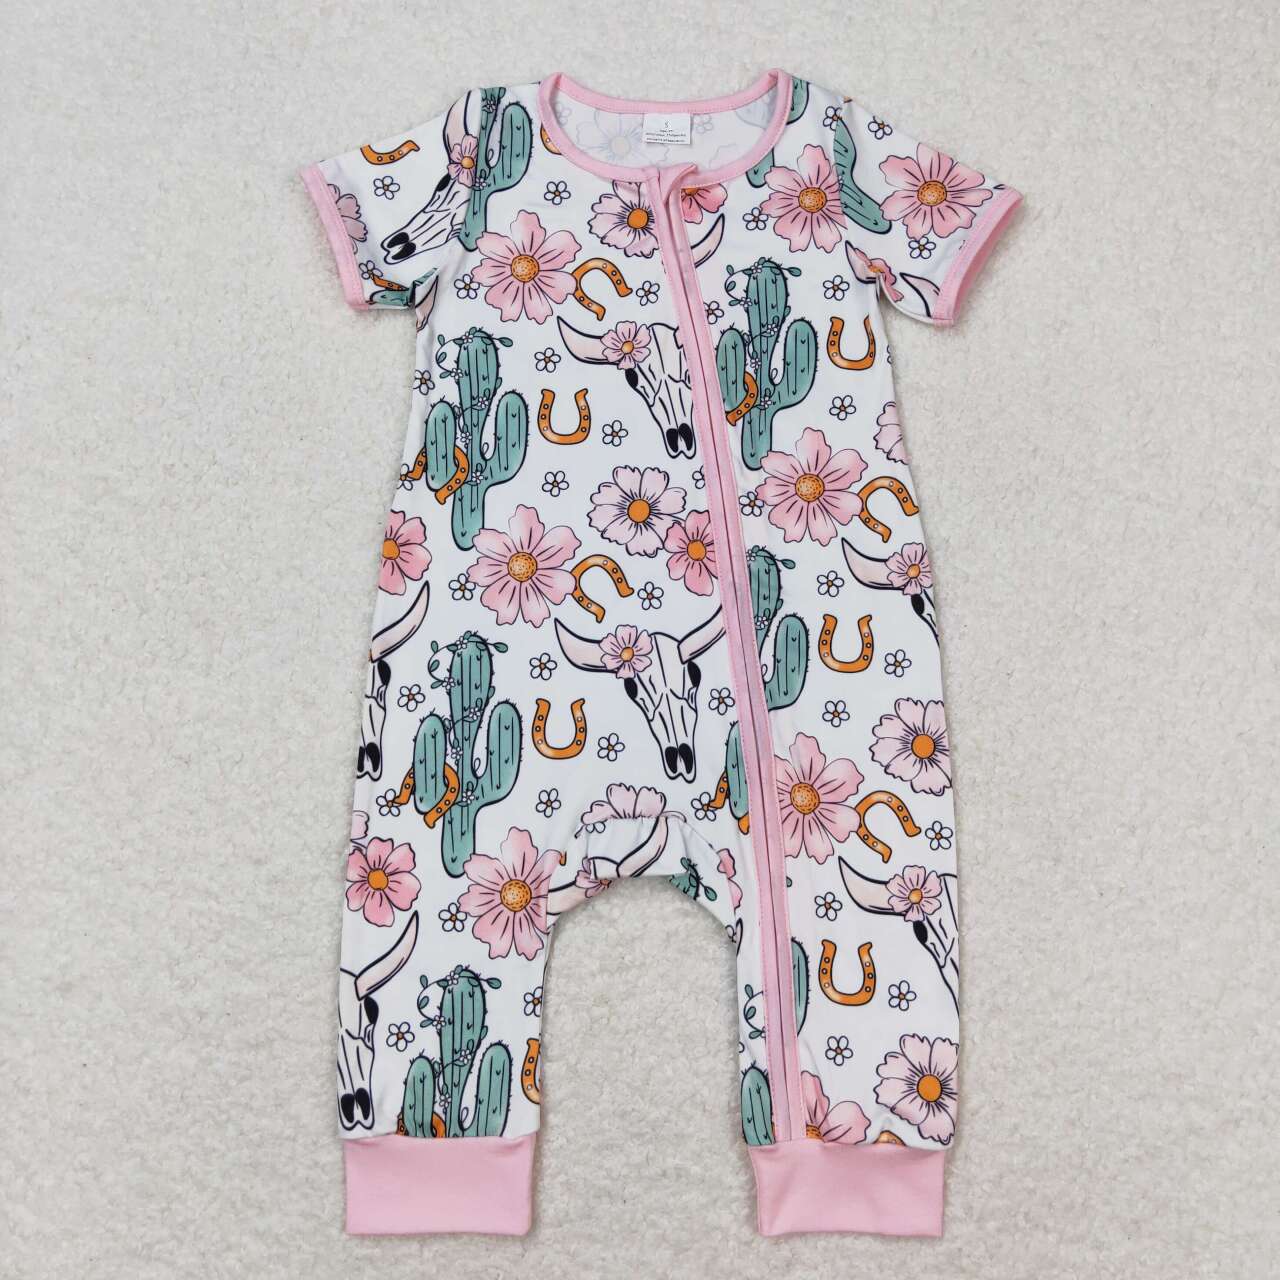 SR1109 RTS baby girl clothes cowboy cactus western clothes toddler girl summer romper